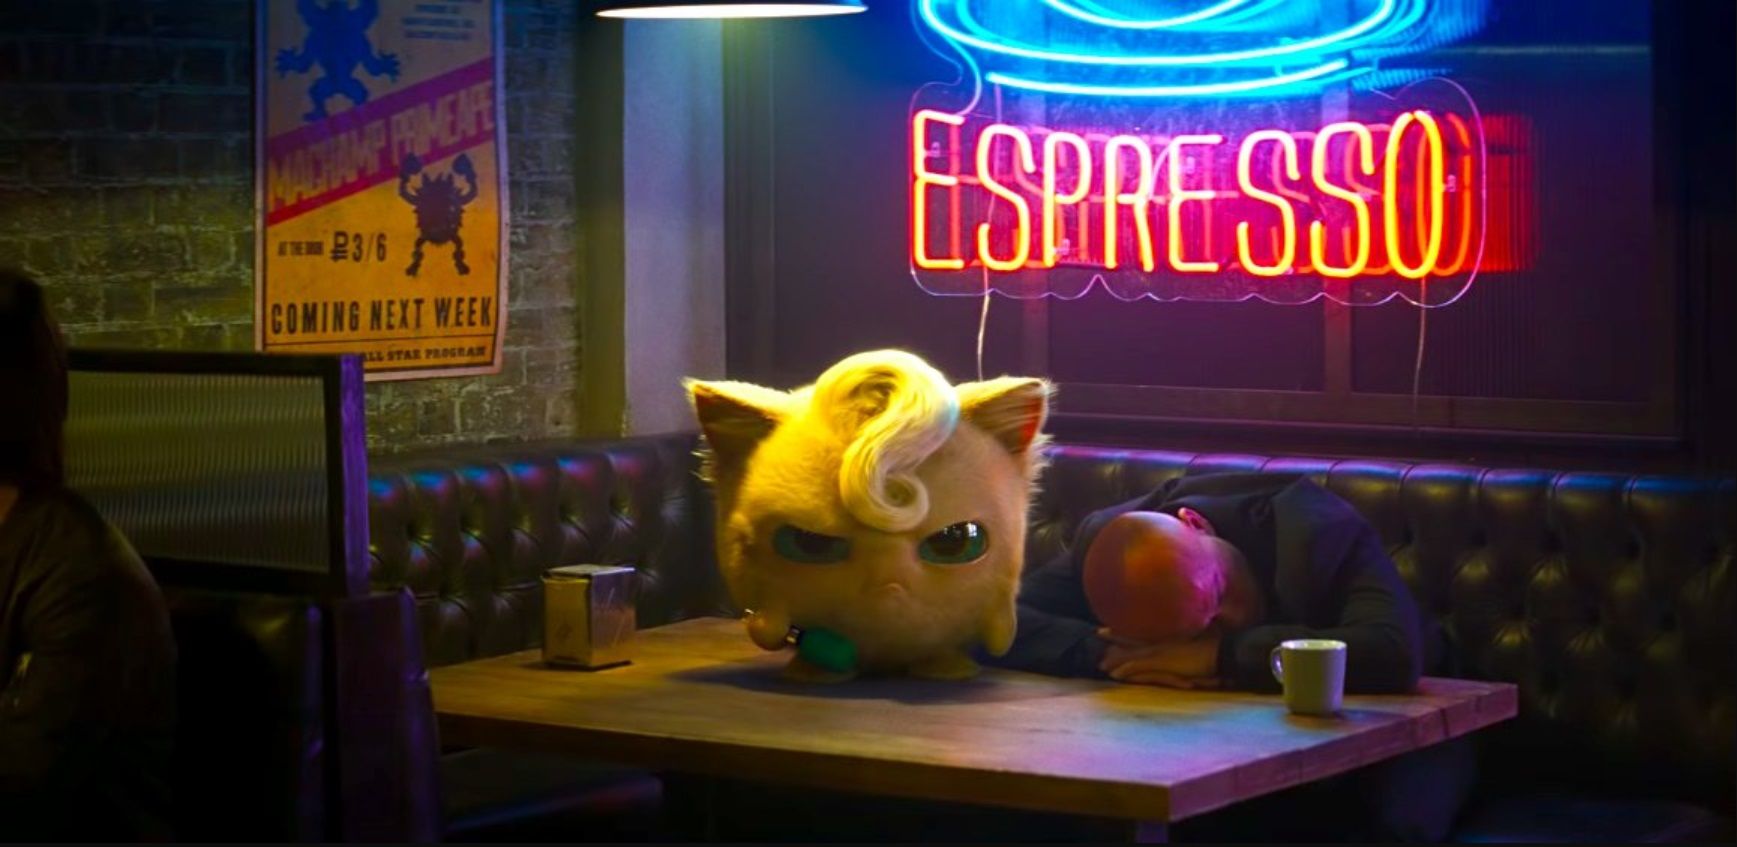 Watch The Detective Pikachu Official Trailer Makes Us Wish The Whole Movie Was About Grumpy Jigglypuff